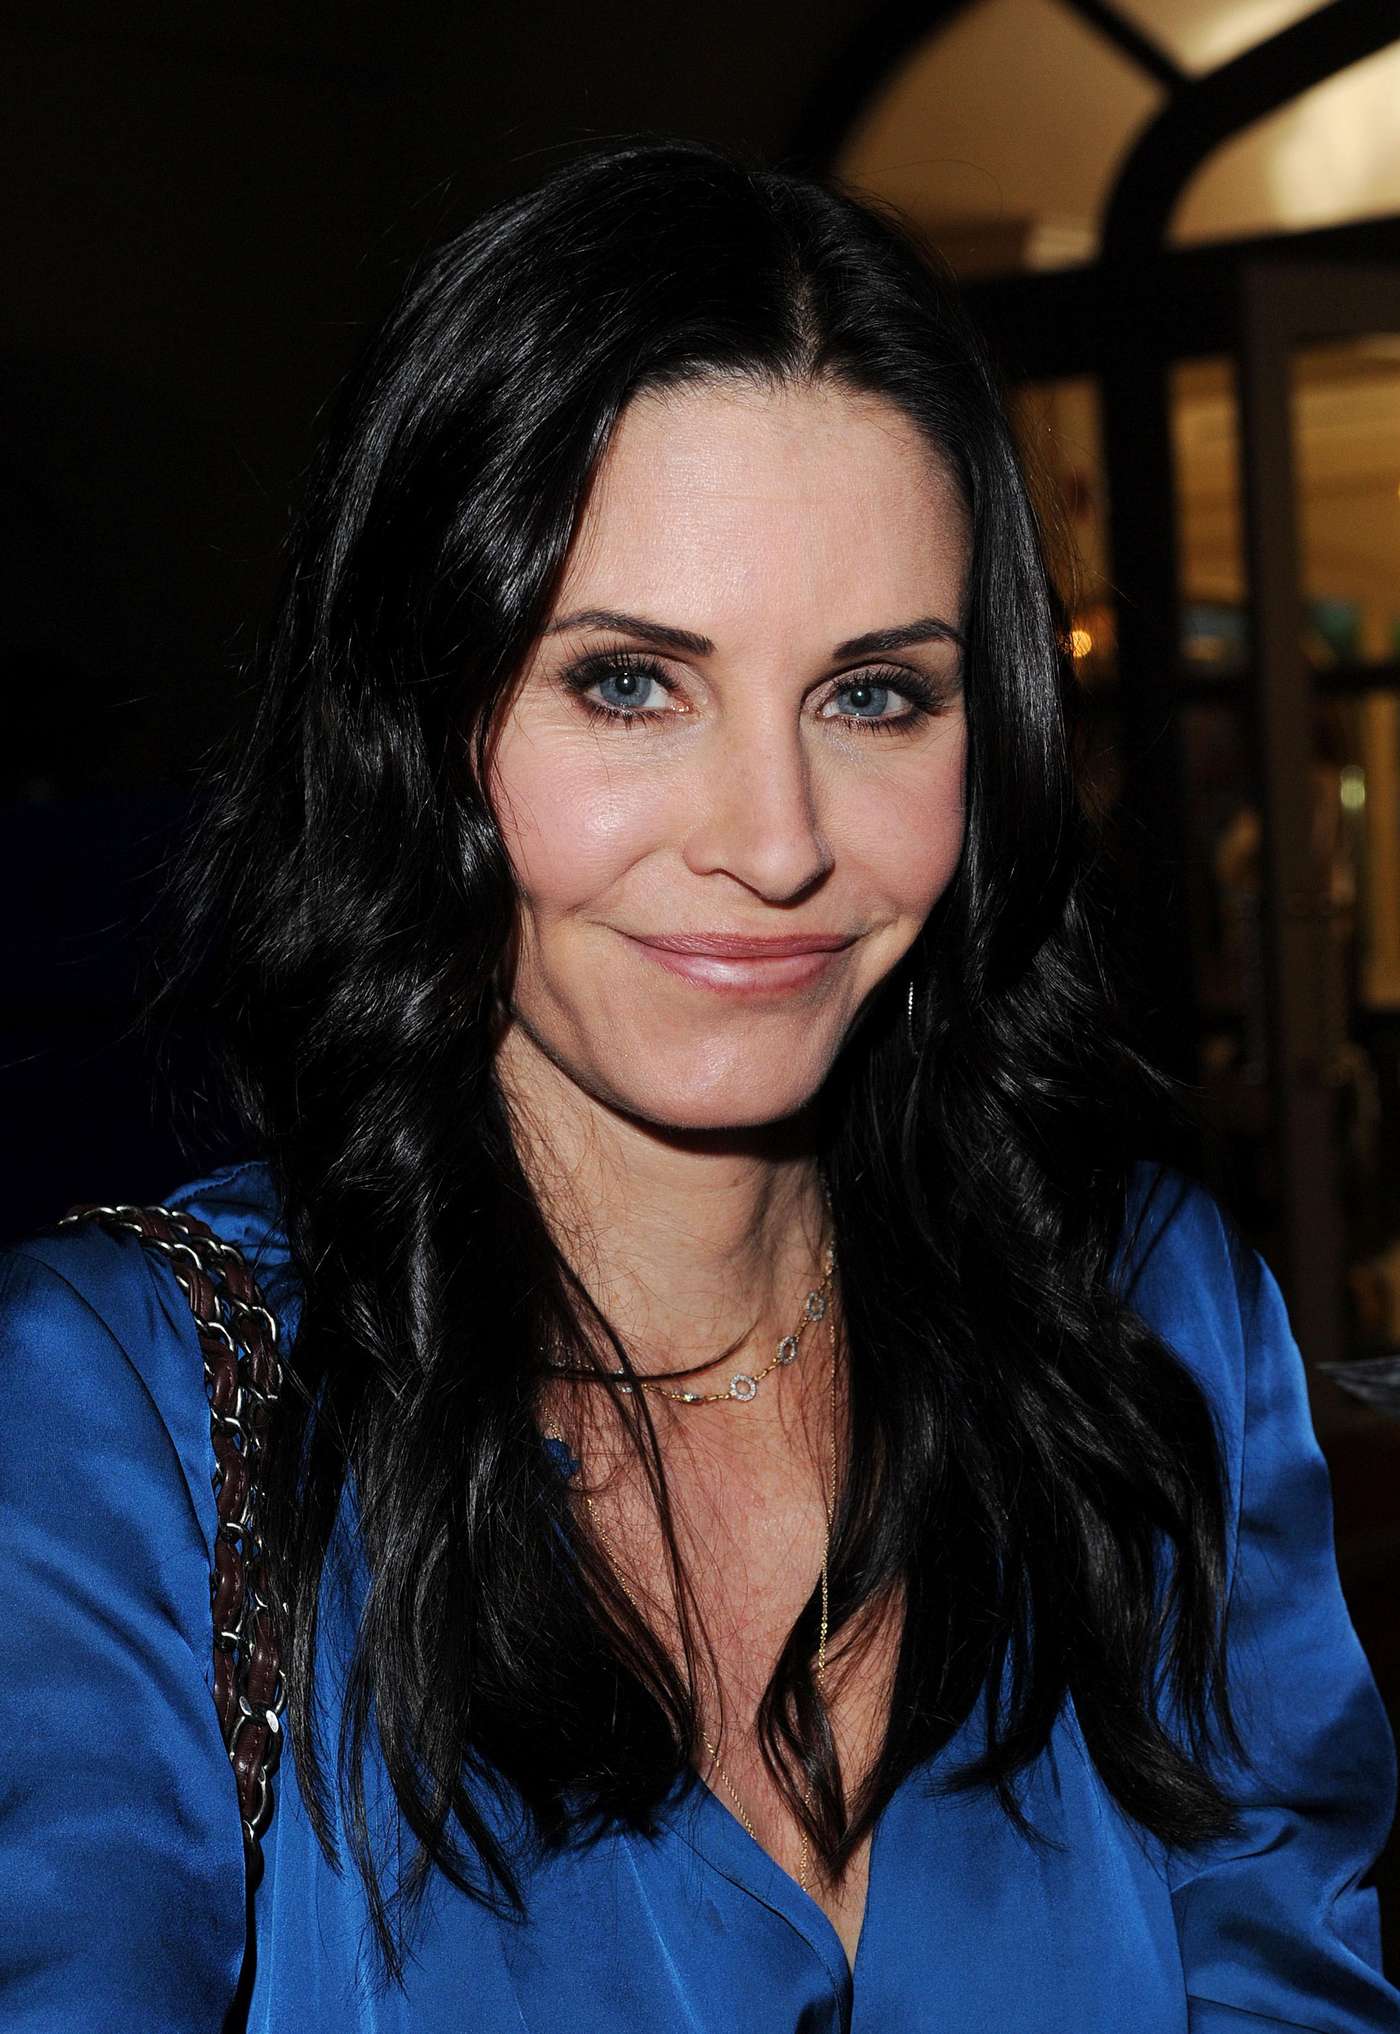 Courtney Cox in tight leather pants at 2013 TCA Winter Tour In Pasadena Jan 4, 2013